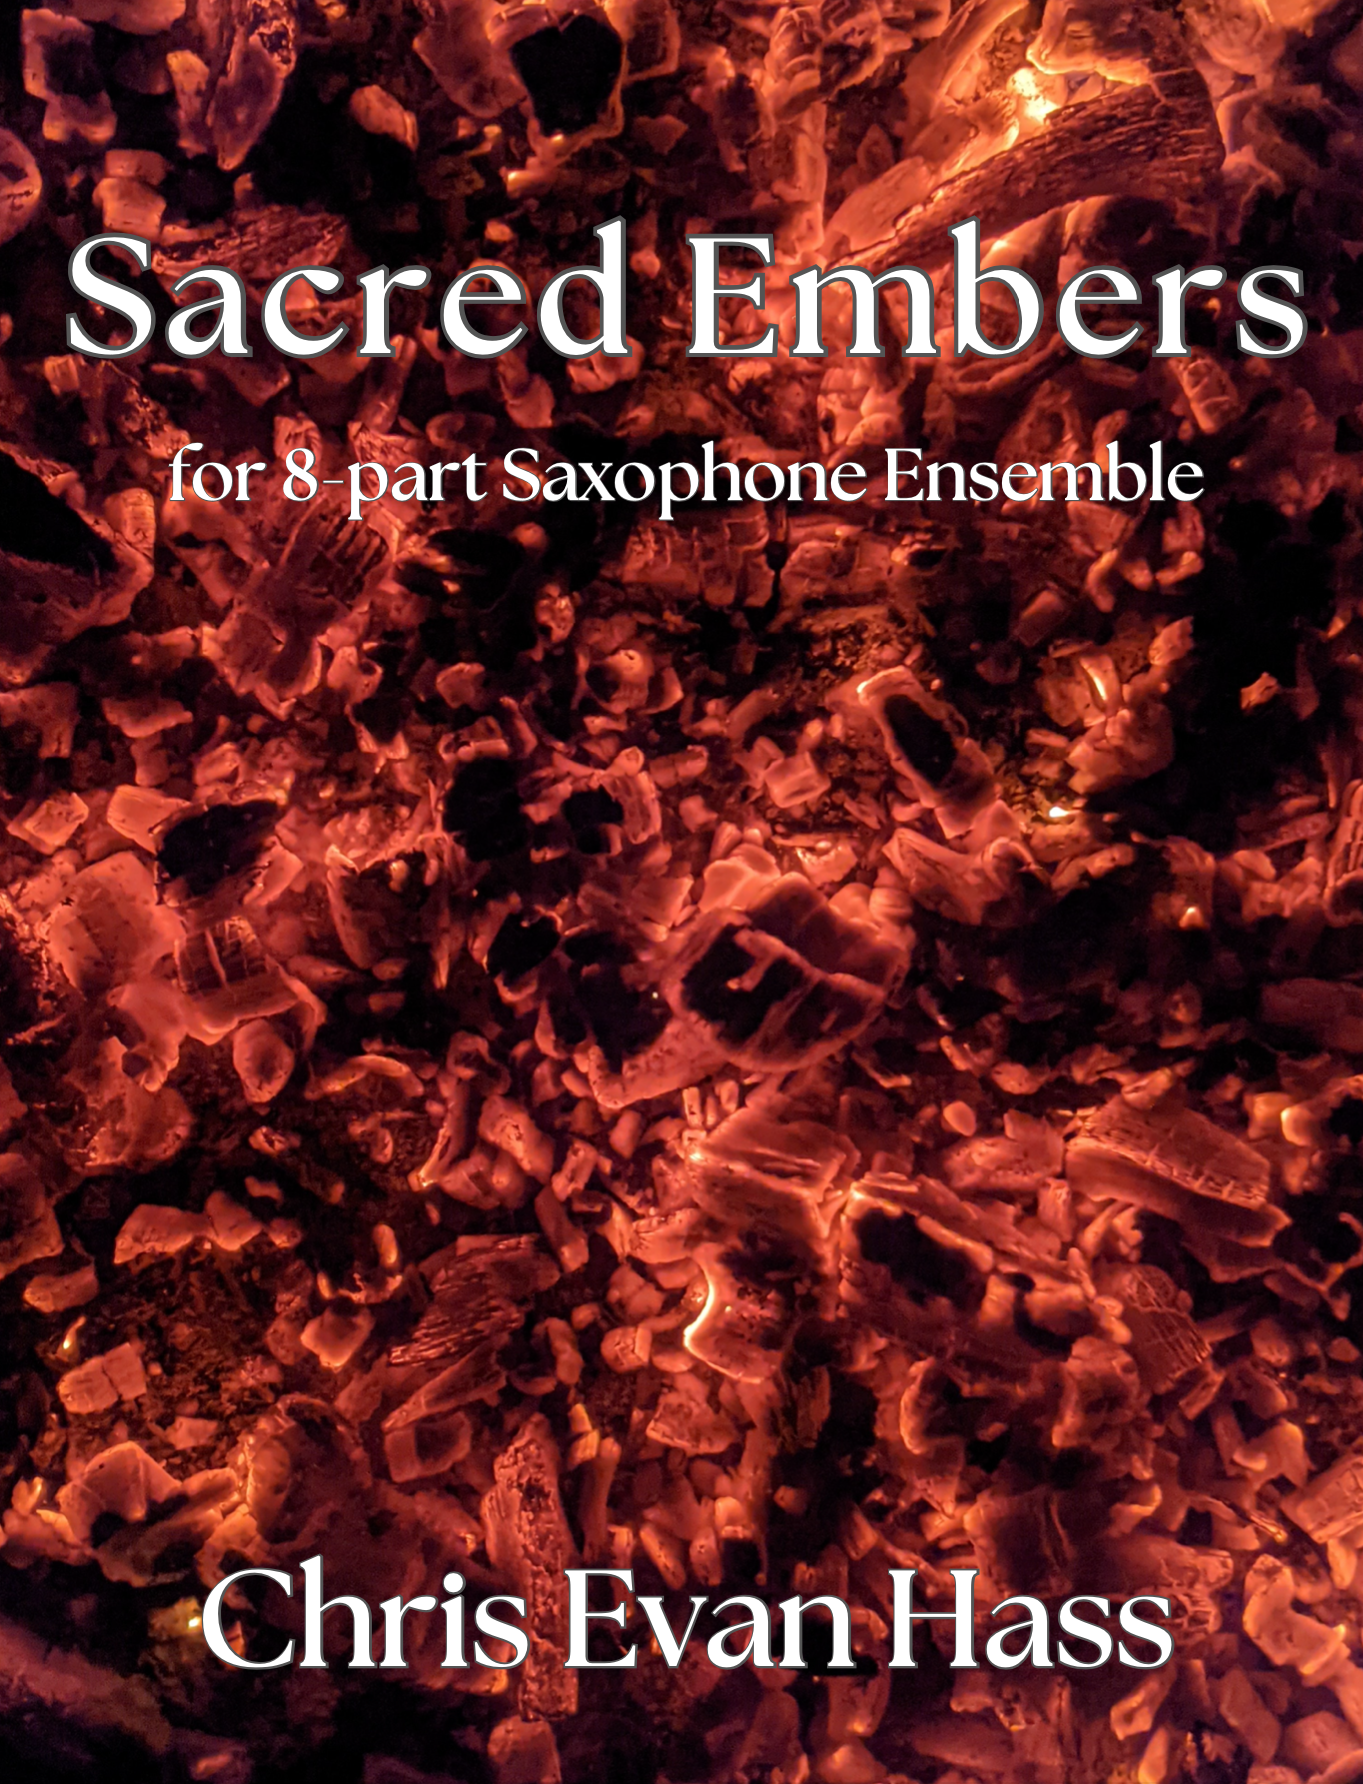 Sacred Embers by Chris Evan Hass